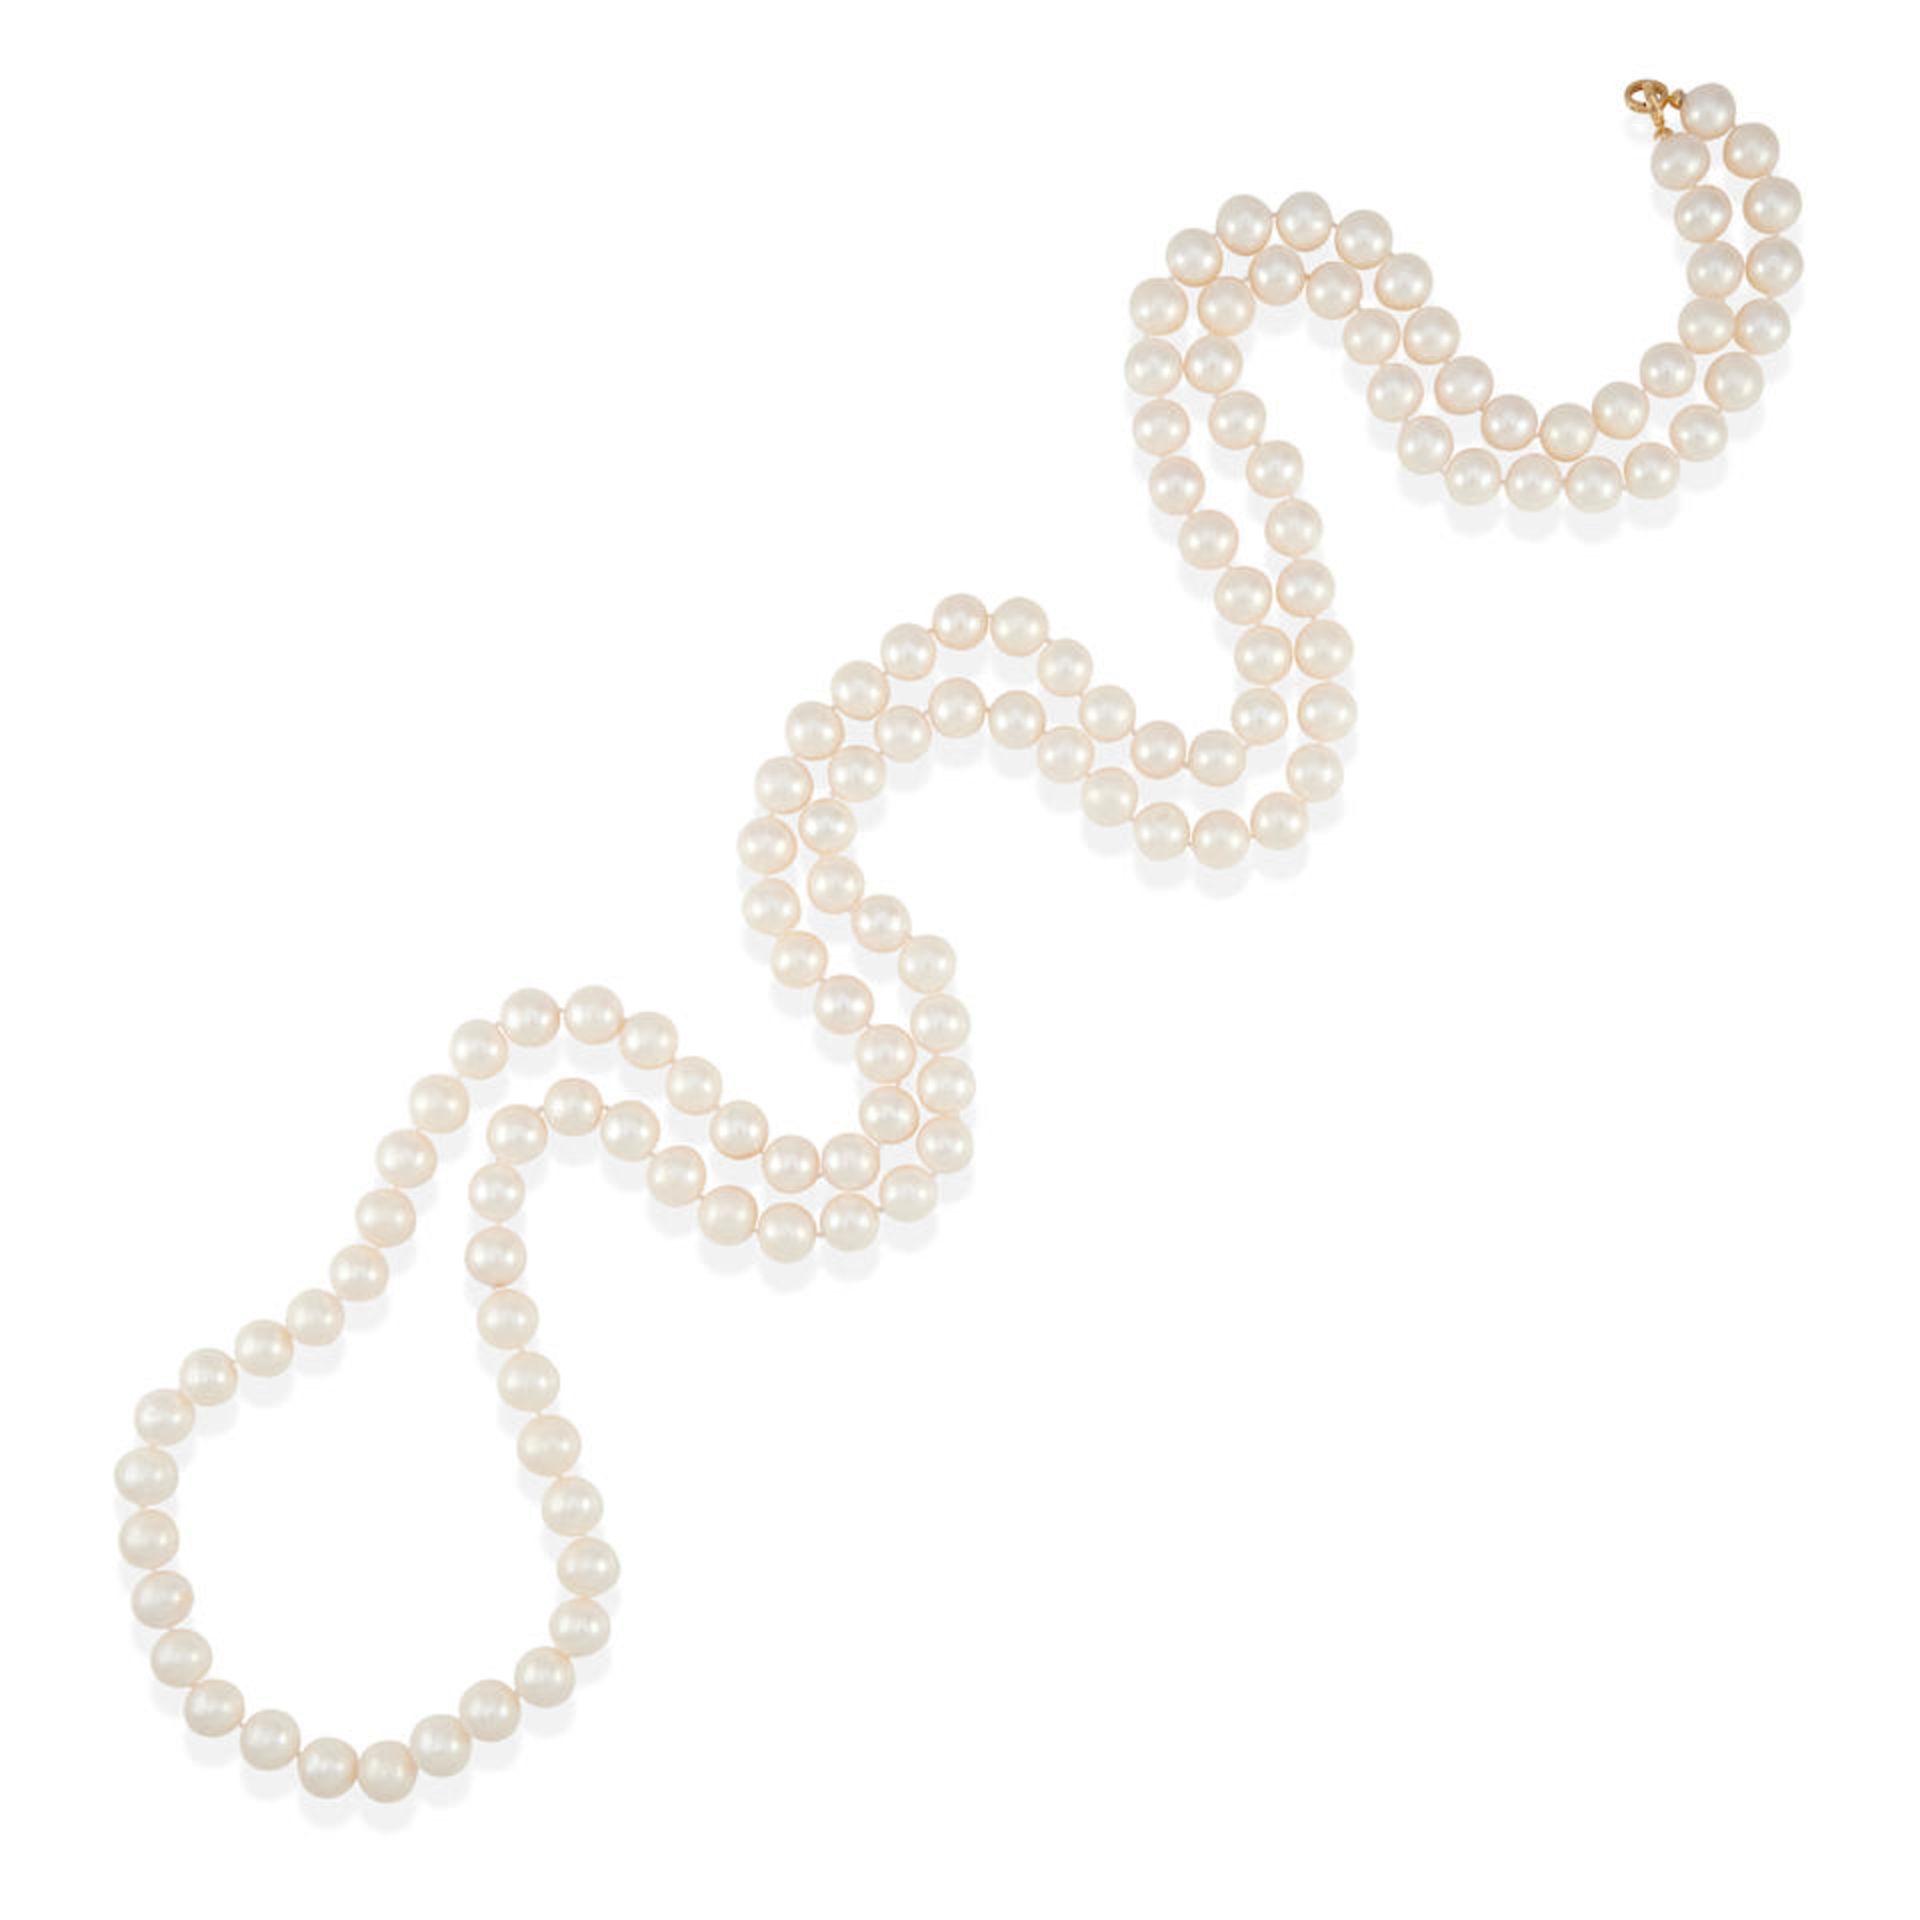 A LONG CULTURED PEARL NECKLACE WITH AN 18K GOLD AND DIAMOND CLASP